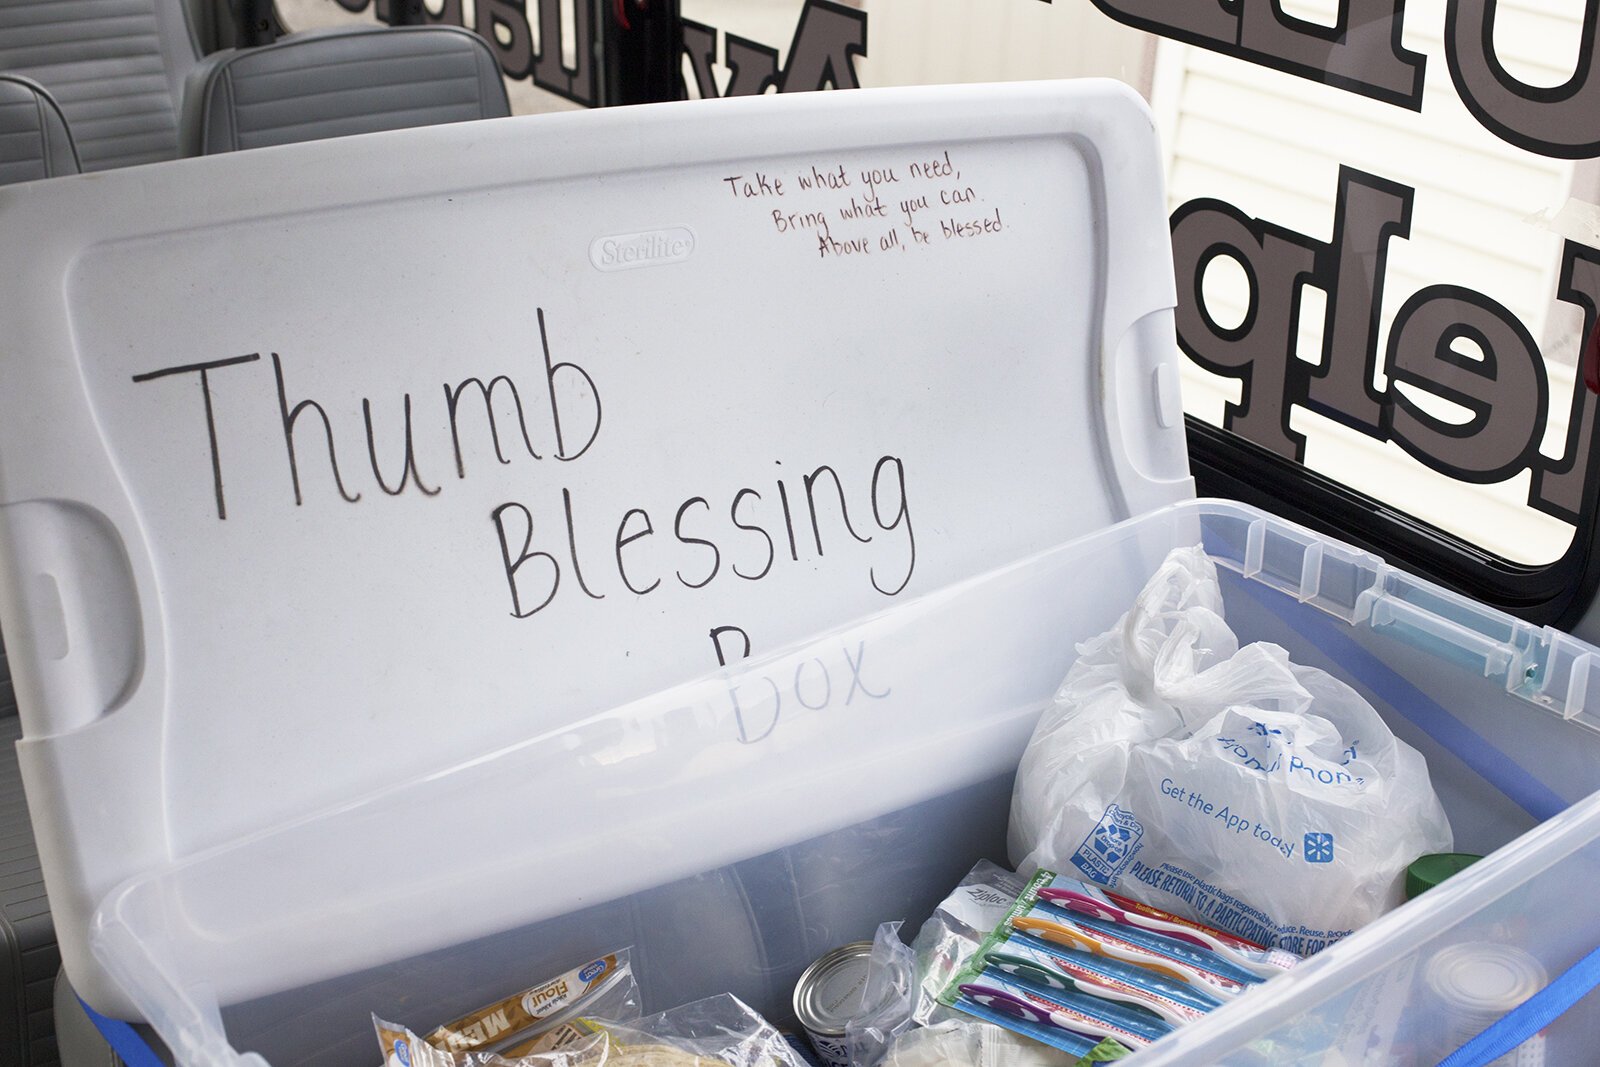 The Thumb Blessing Box on the Thumbody Express.